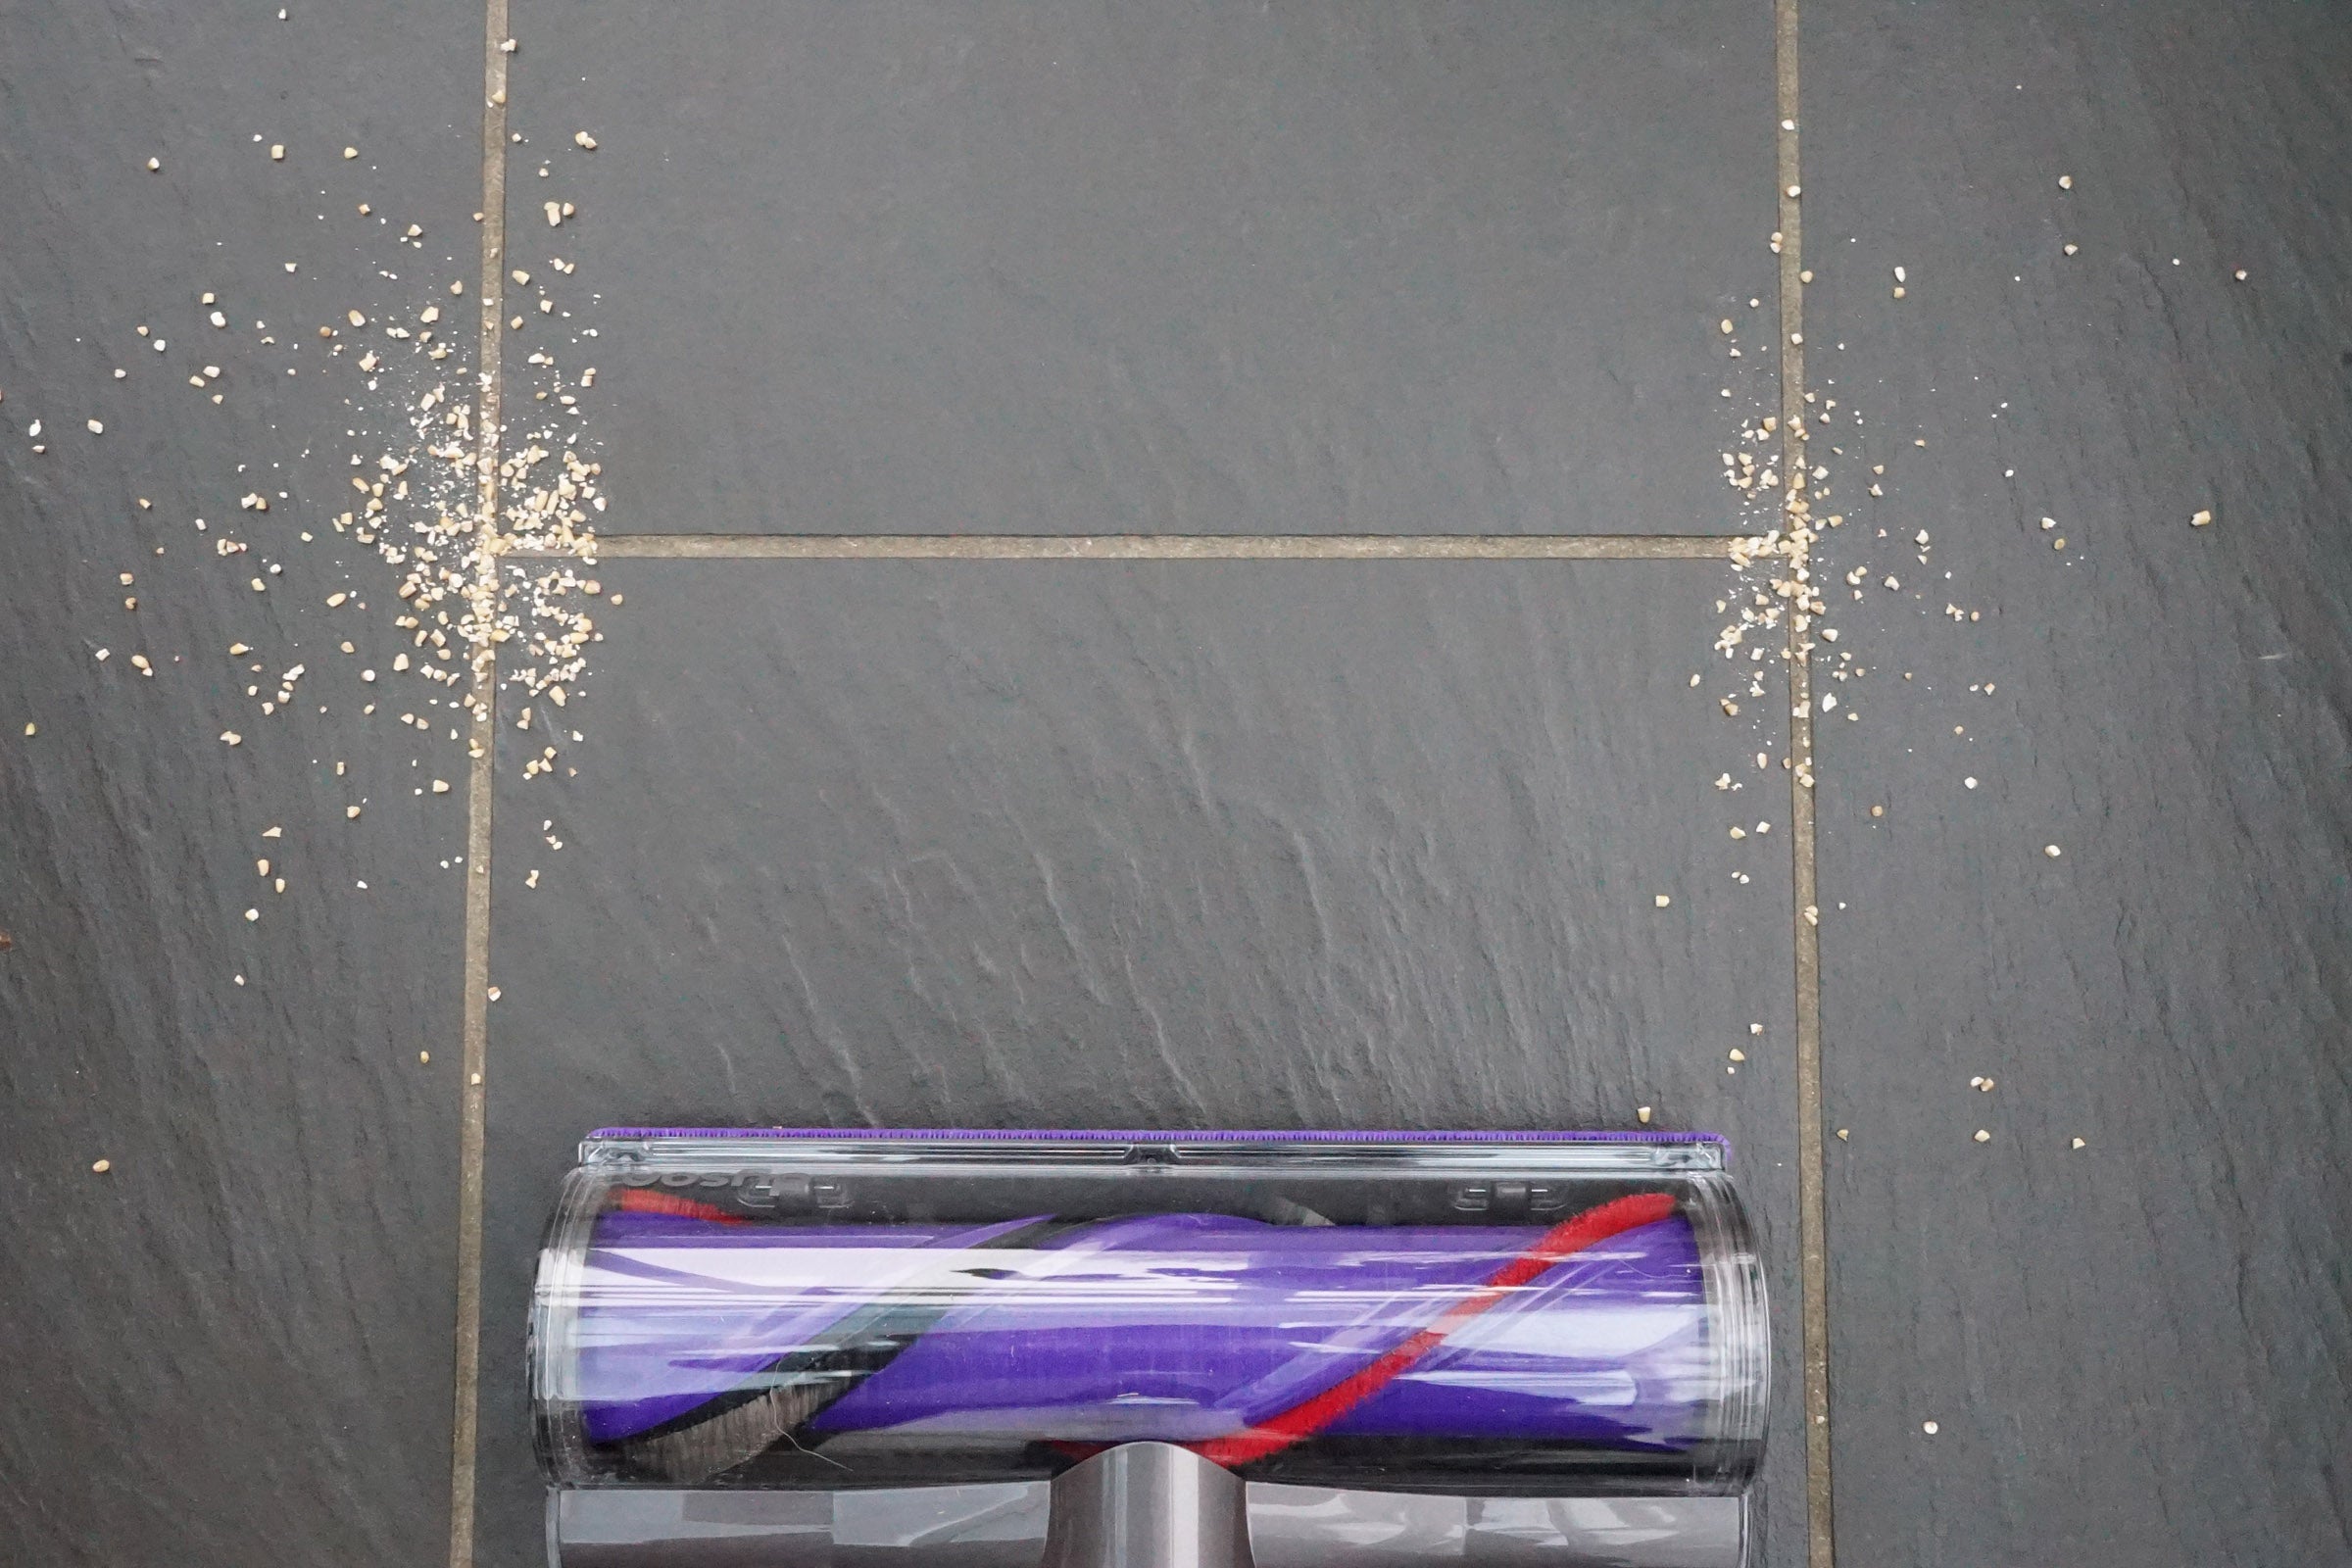 Dyson Cyclone V10 vacuum cleaning oats off dark tile floor.